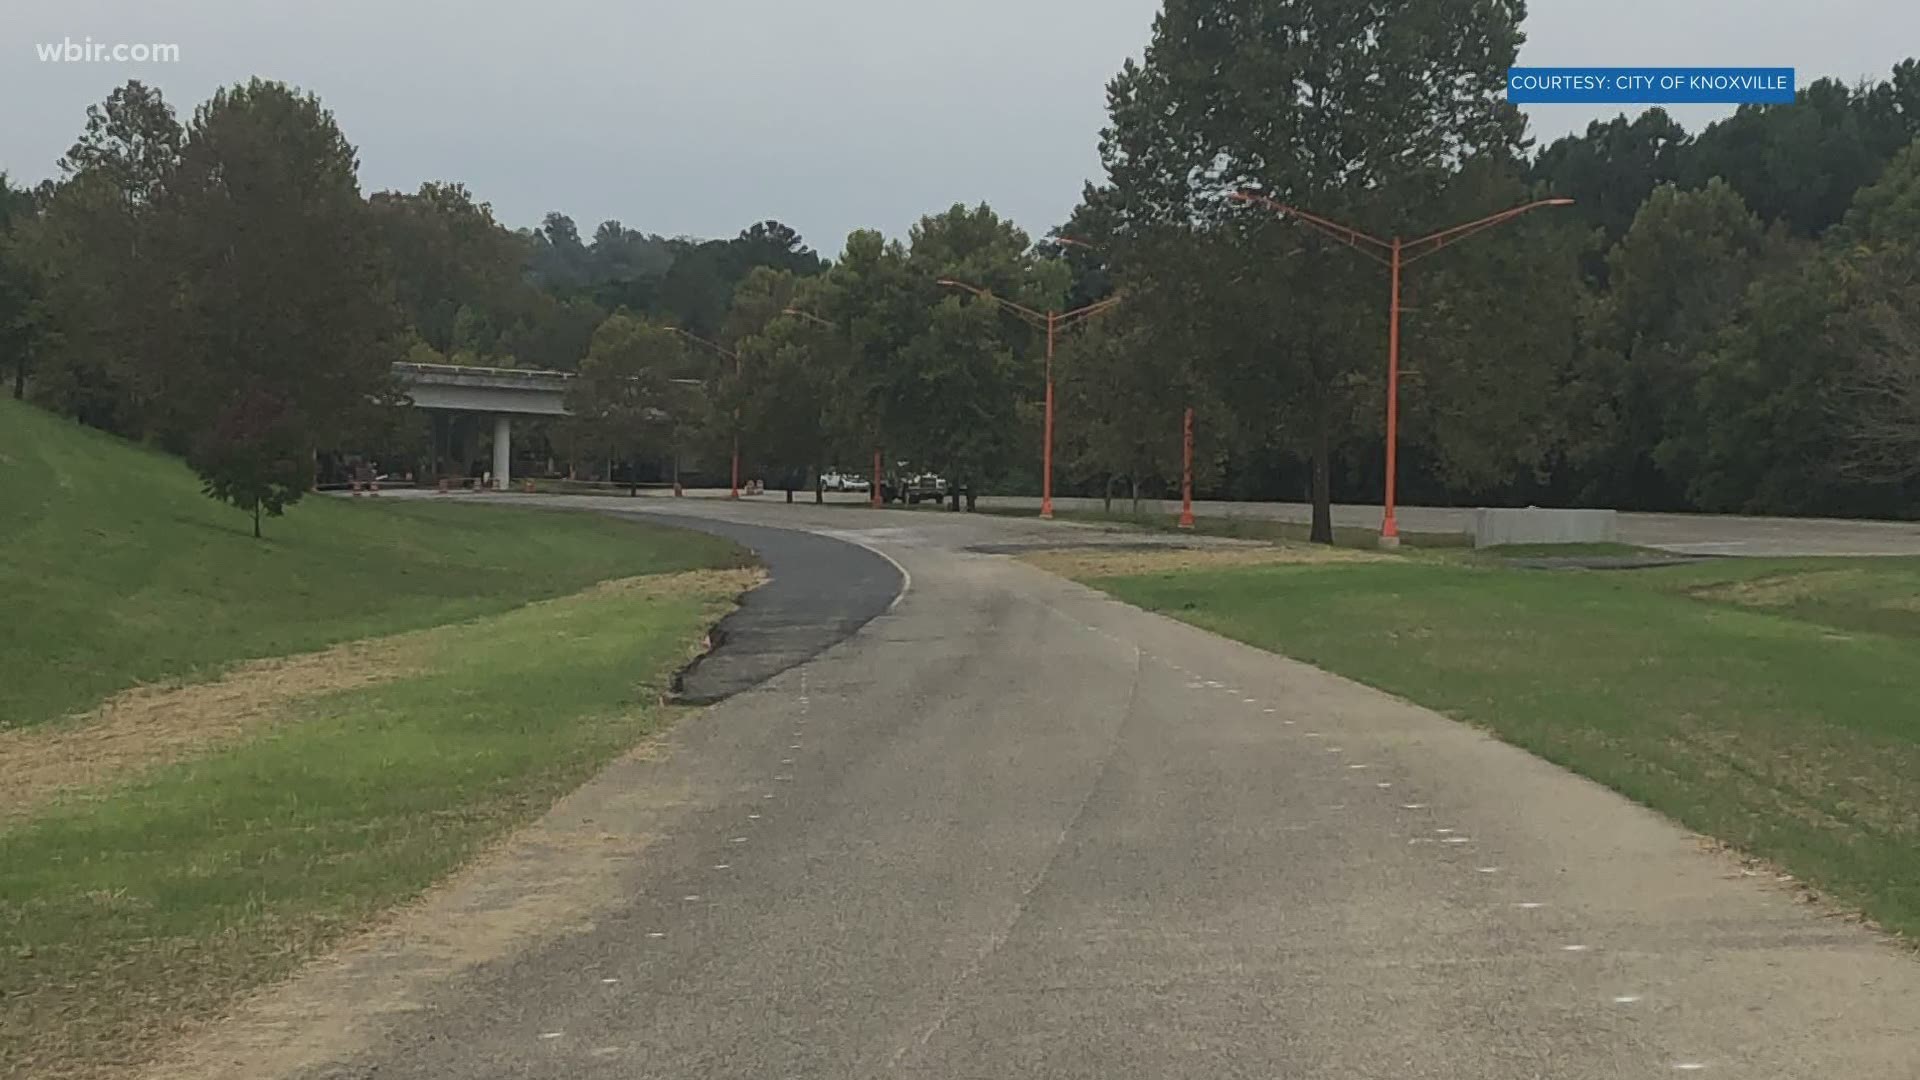 The $10 million project will serve as a "front porch" to South Knoxville's urban wilderness and connect East and South Knoxville to downtown.